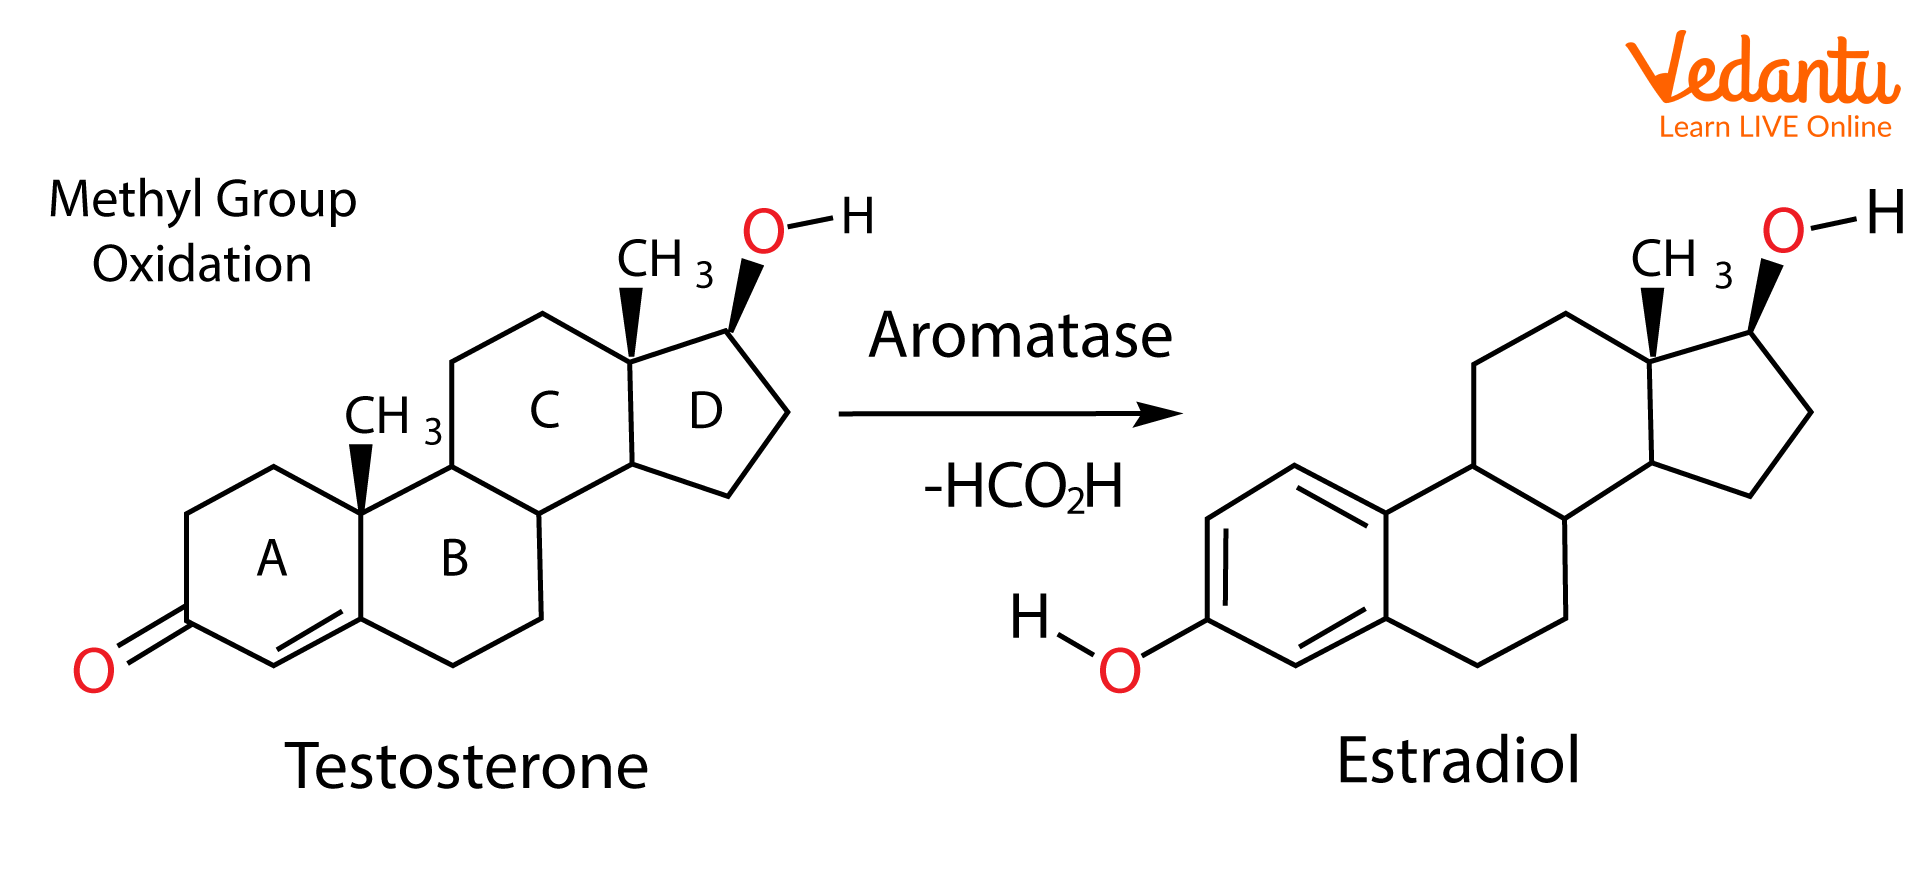 Conversion of testosterone to estradiol by aromatase